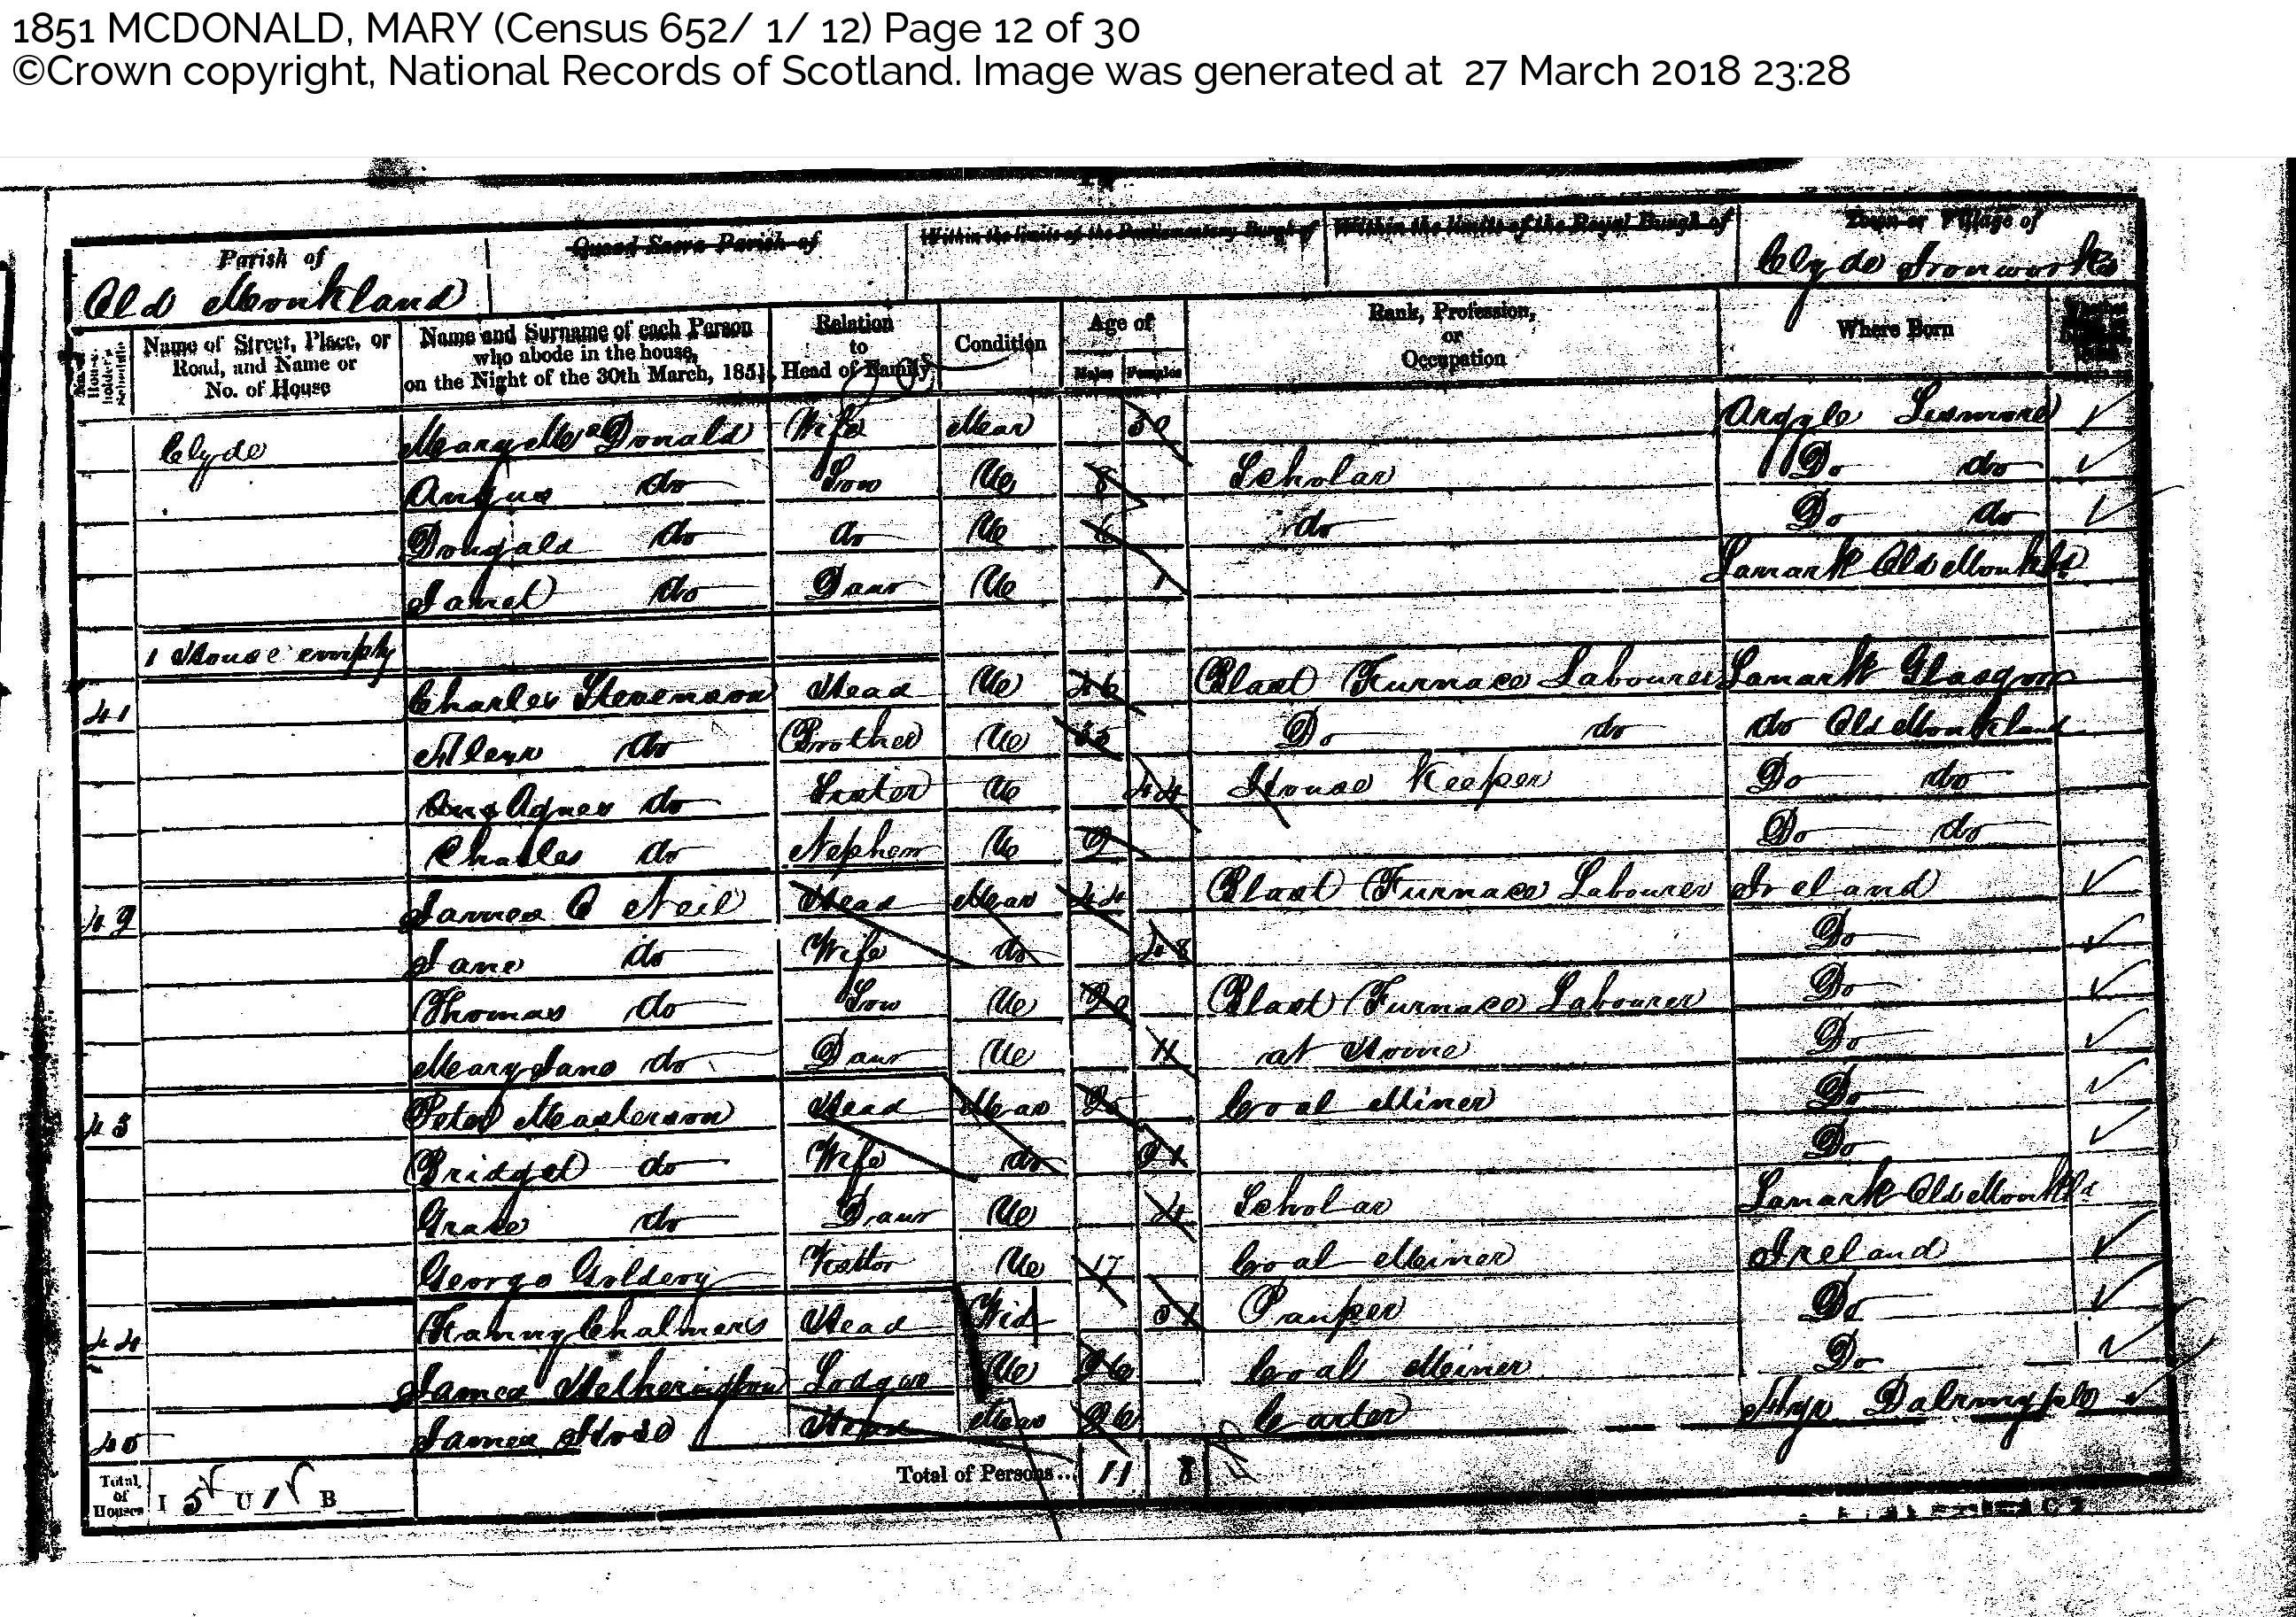 Mcdonald family 1851 census pg2, Linked To: <a href='i661.html' >Mary McGregor 🧬</a>